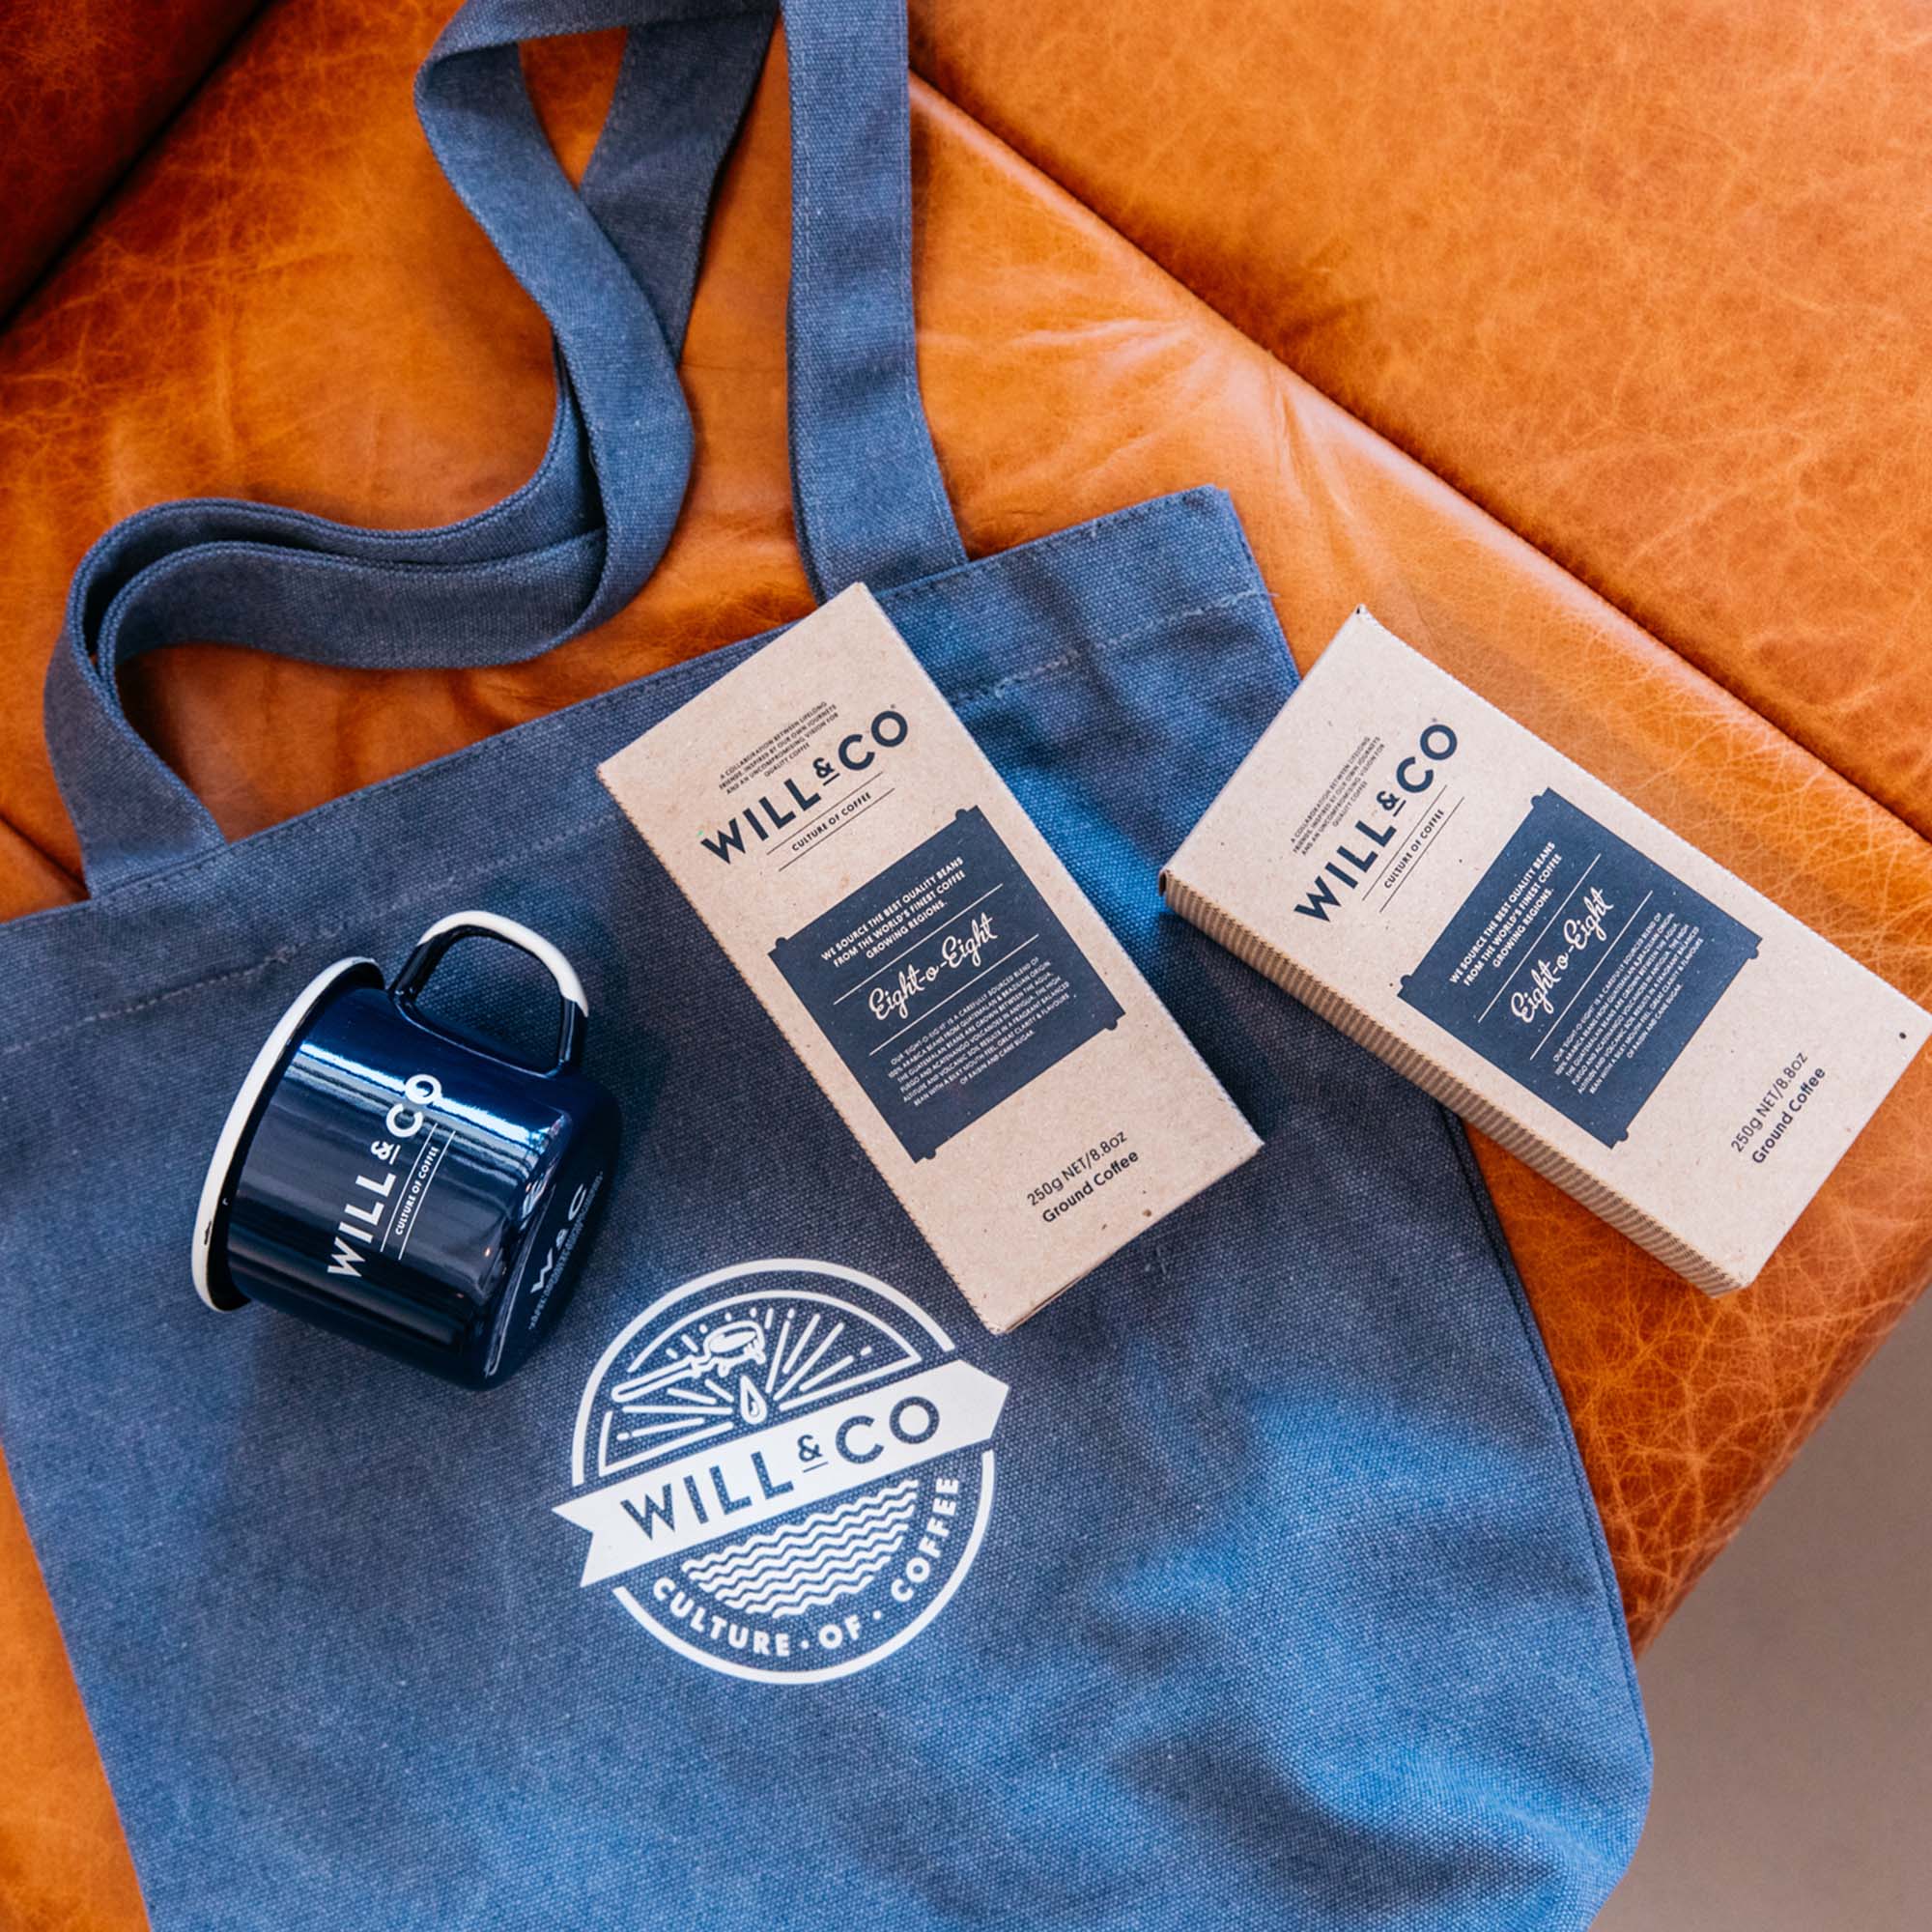 Wills Specialty Bundles | Will & Co Coffee